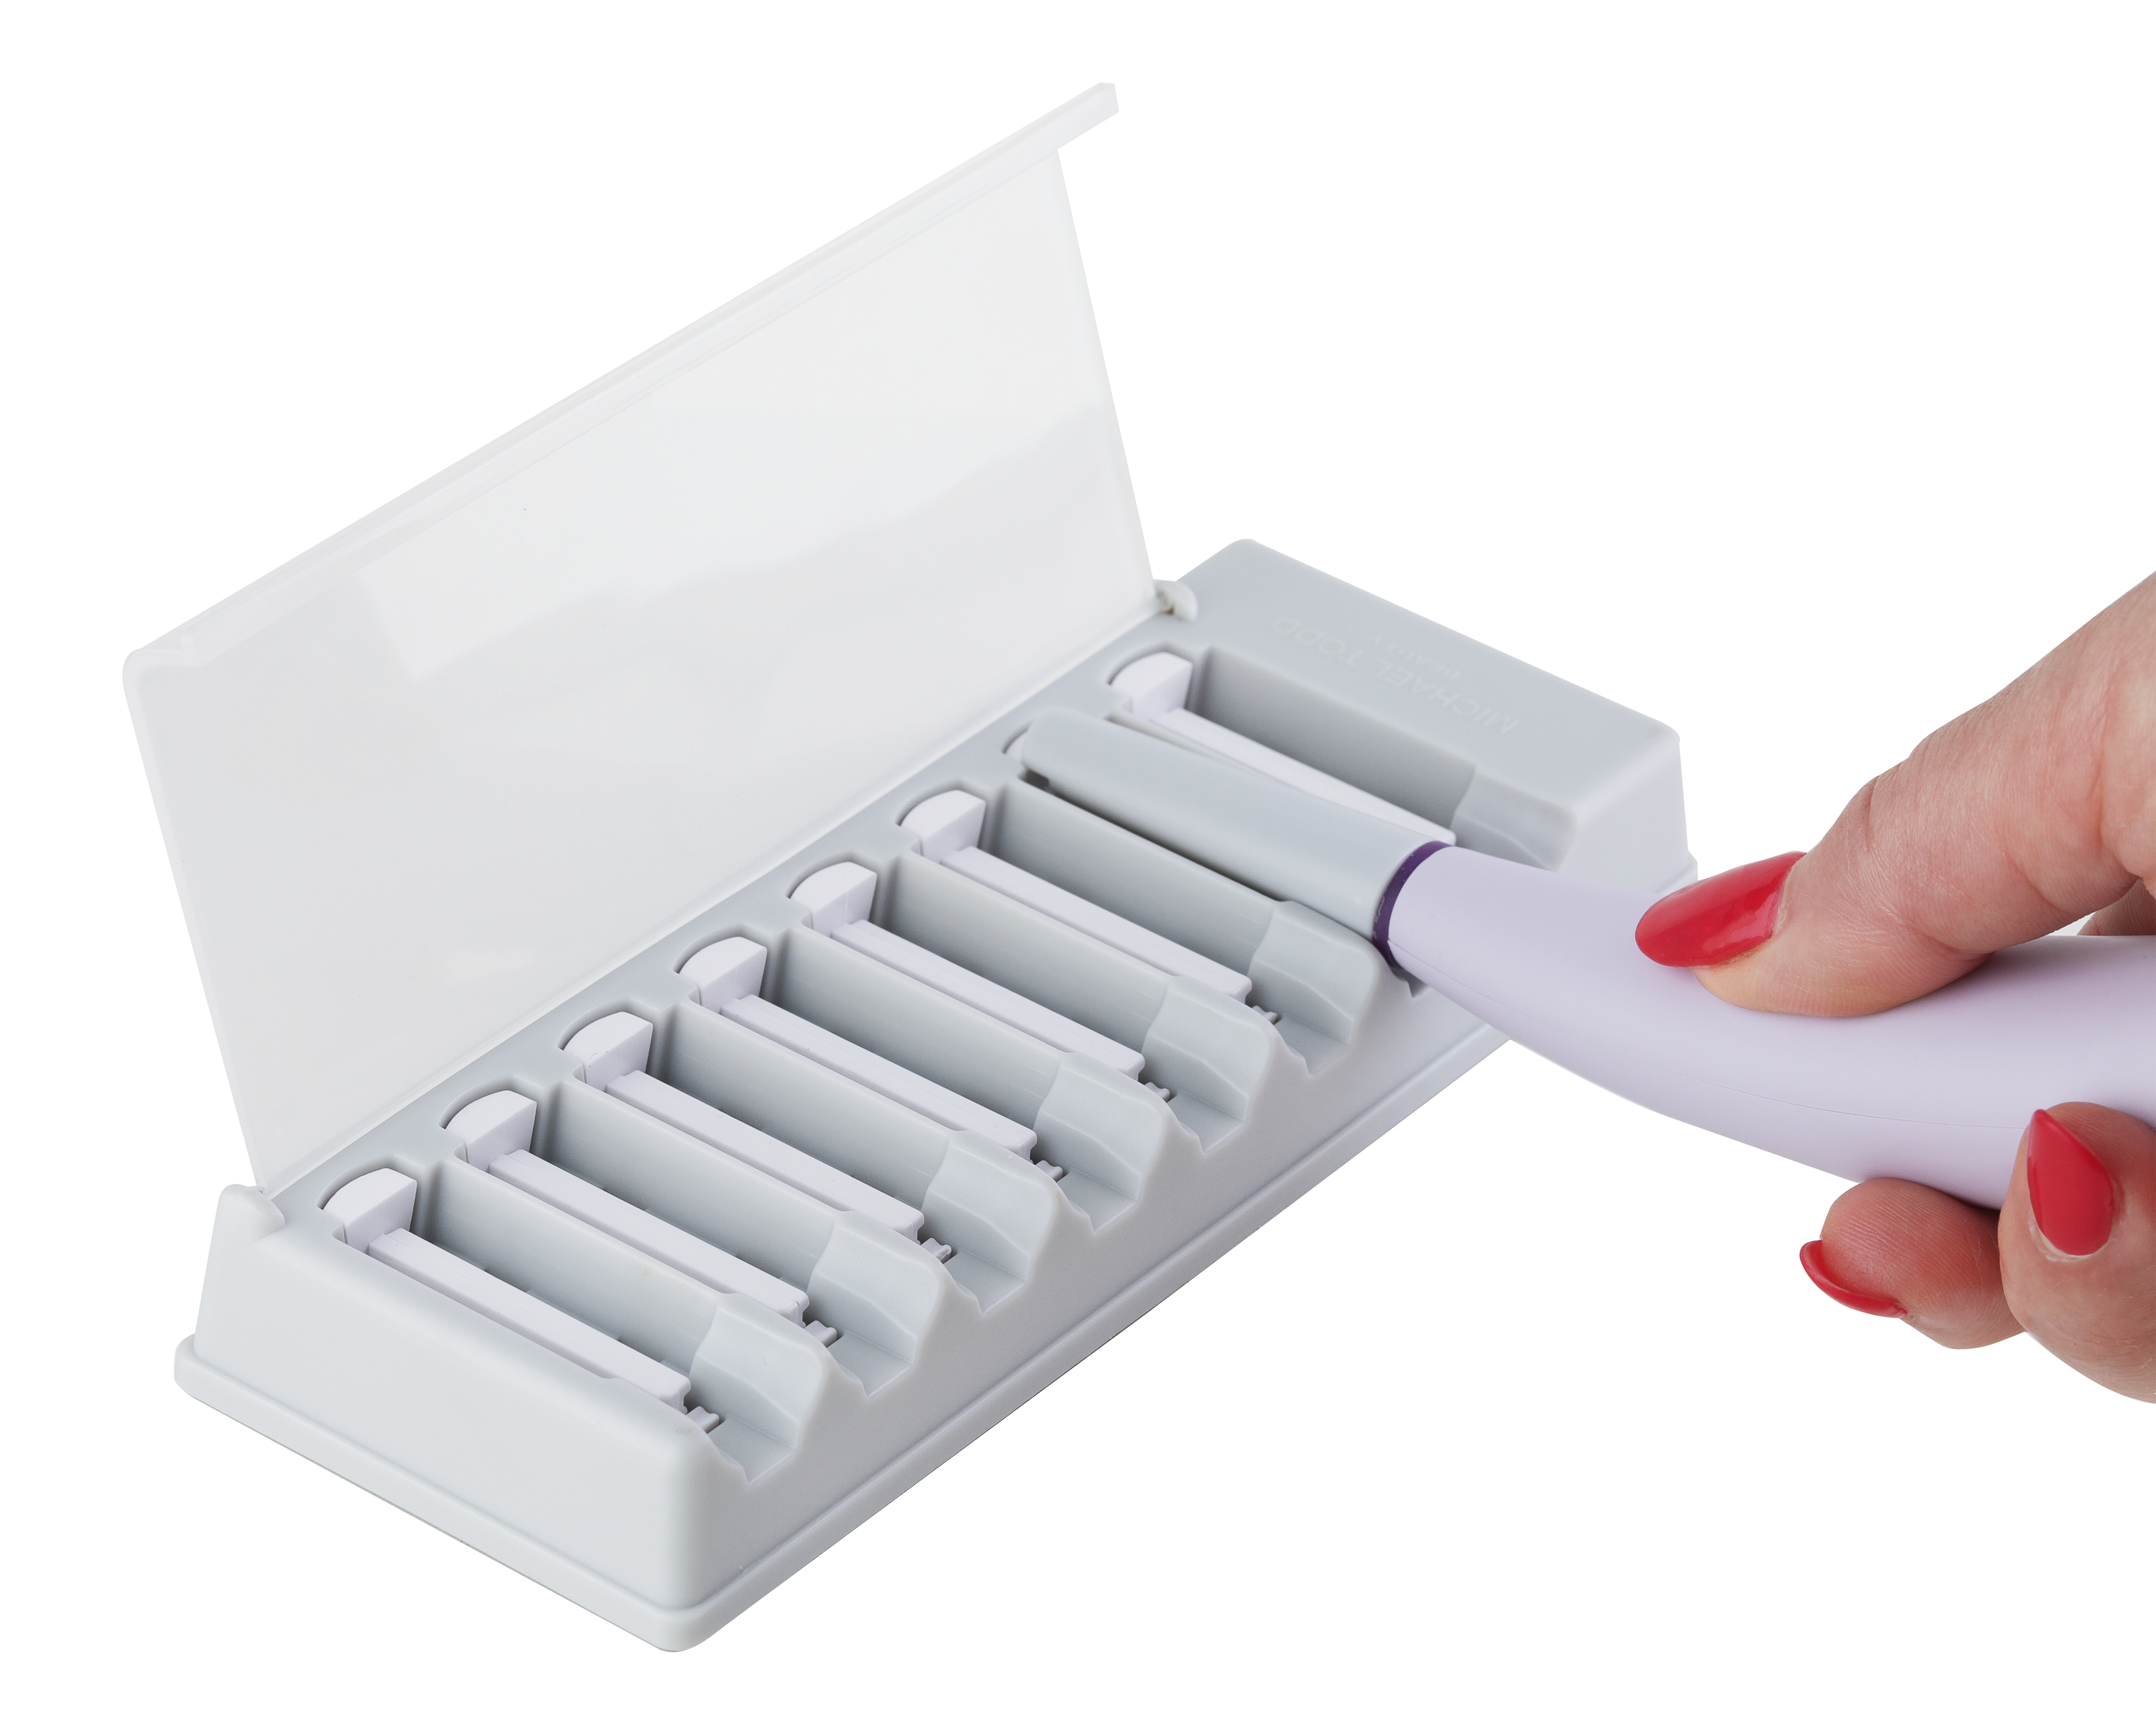 A hand is holding a nail filer in a white case, with Sonicsmooth Replacement Tips by Michael Todd Beauty in mind.